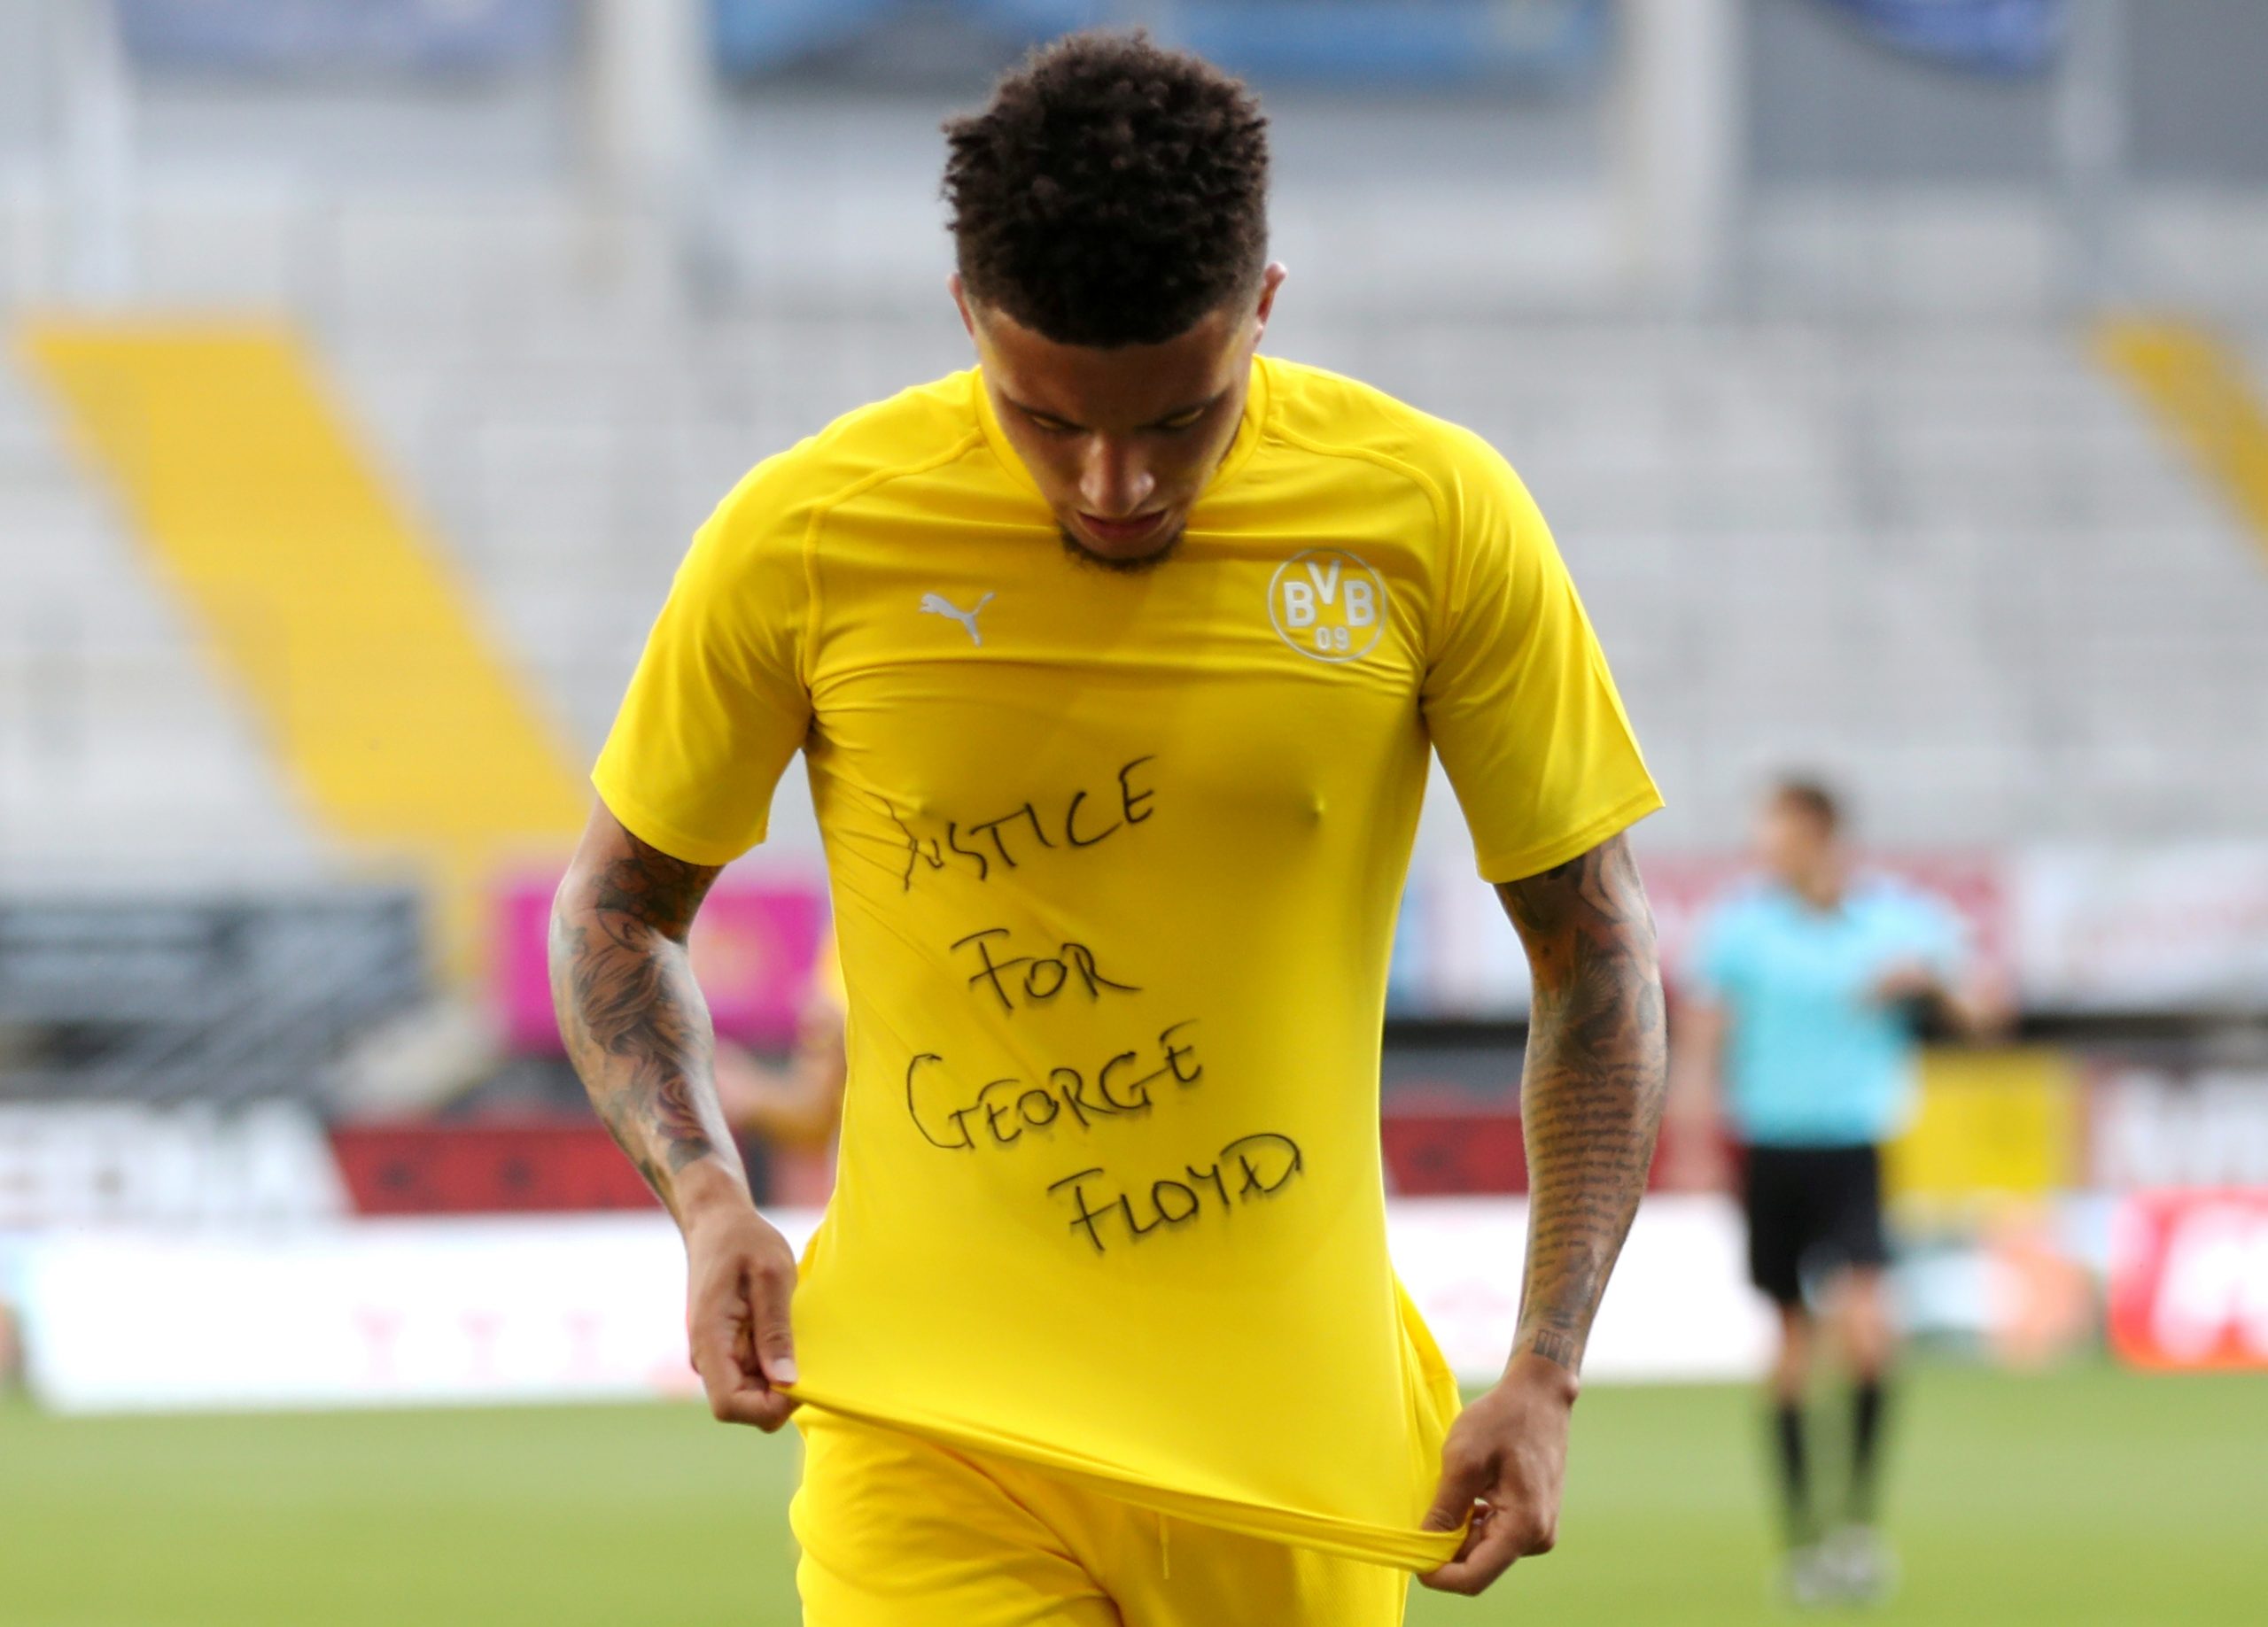 Bundesliga - SC Paderborn v Borussia Dortmund Soccer Football - Bundesliga - SC Paderborn v Borussia Dortmund - Benteler Arena, Paderborn, Germany - May 31, 2020 Borussia Dortmund's Jadon Sancho celebrates scoring their second goal with a 'Justice for George Floyd' shirt, as play resumes behind closed doors following the outbreak of the coronavirus disease (COVID-19) Lars Baron/Pool via REUTERS   DFL regulations prohibit any use of photographs as image sequences and/or quasi-video     TPX IMAGES OF THE DAY POOL